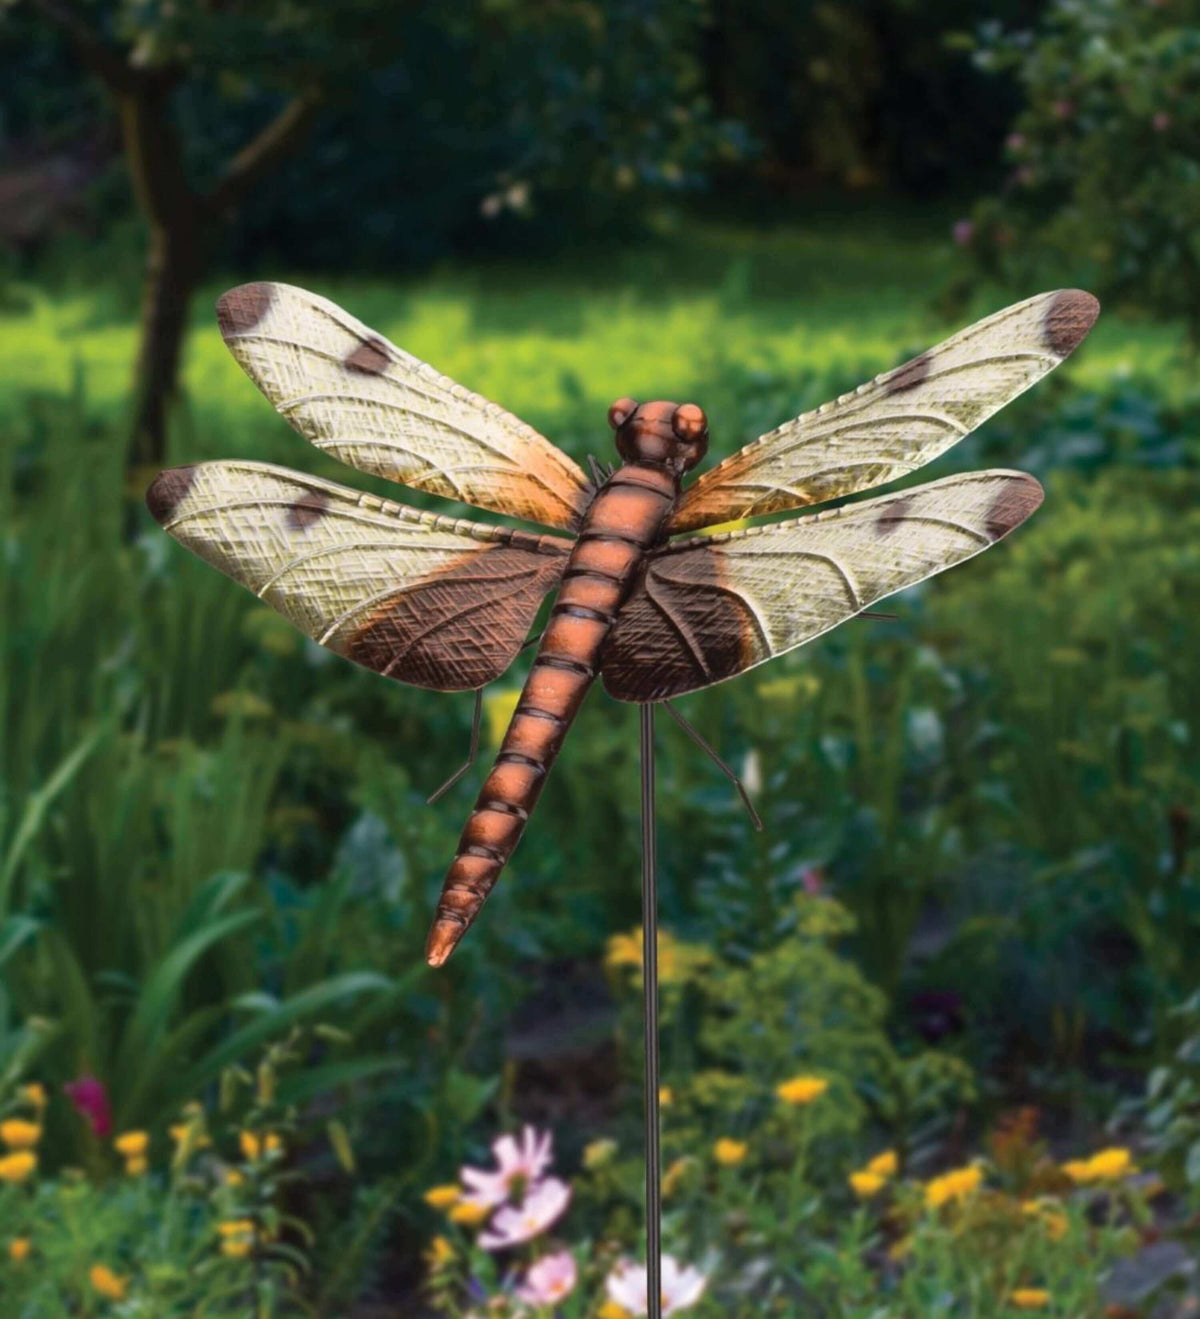 Calico Dragonfly 46 Inch Wall Decor or Stake 